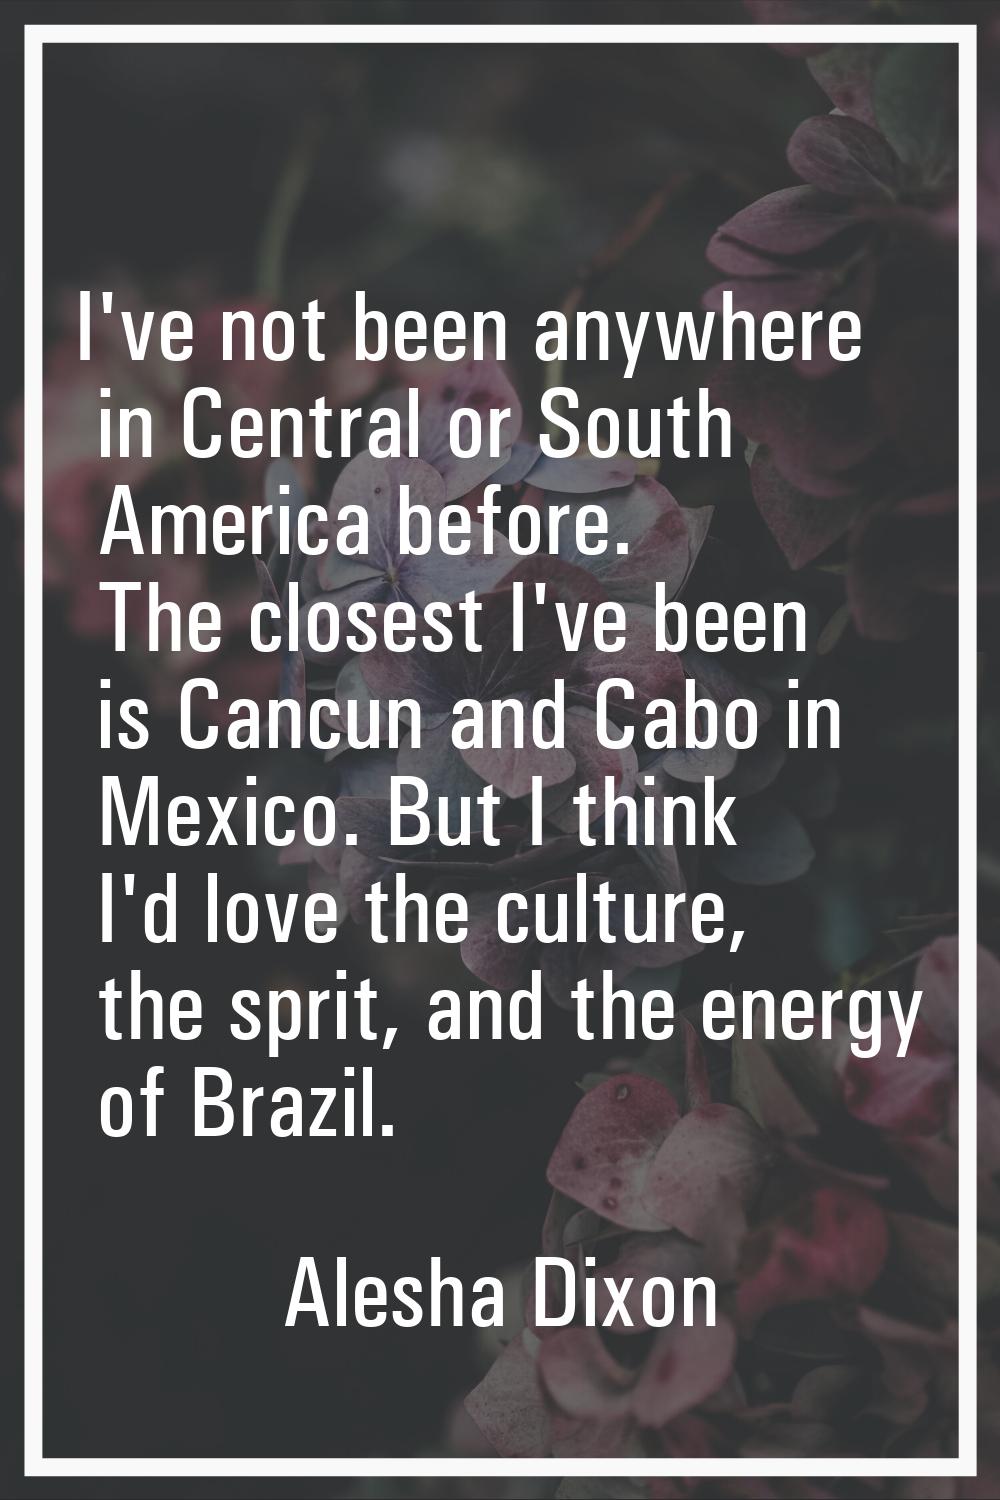 I've not been anywhere in Central or South America before. The closest I've been is Cancun and Cabo